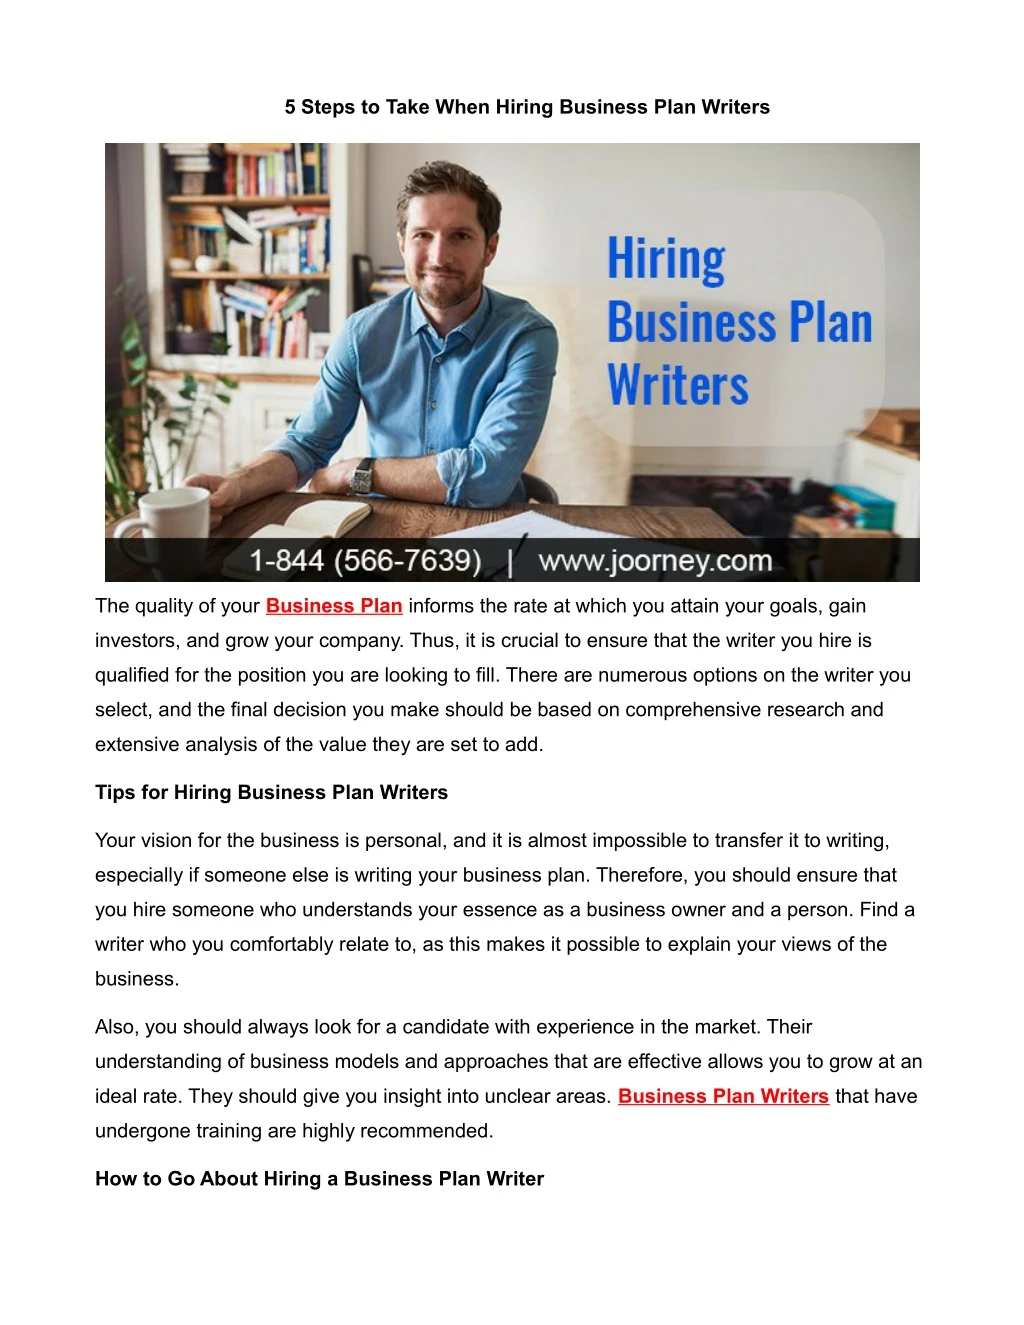 5 steps to take when hiring business plan writers